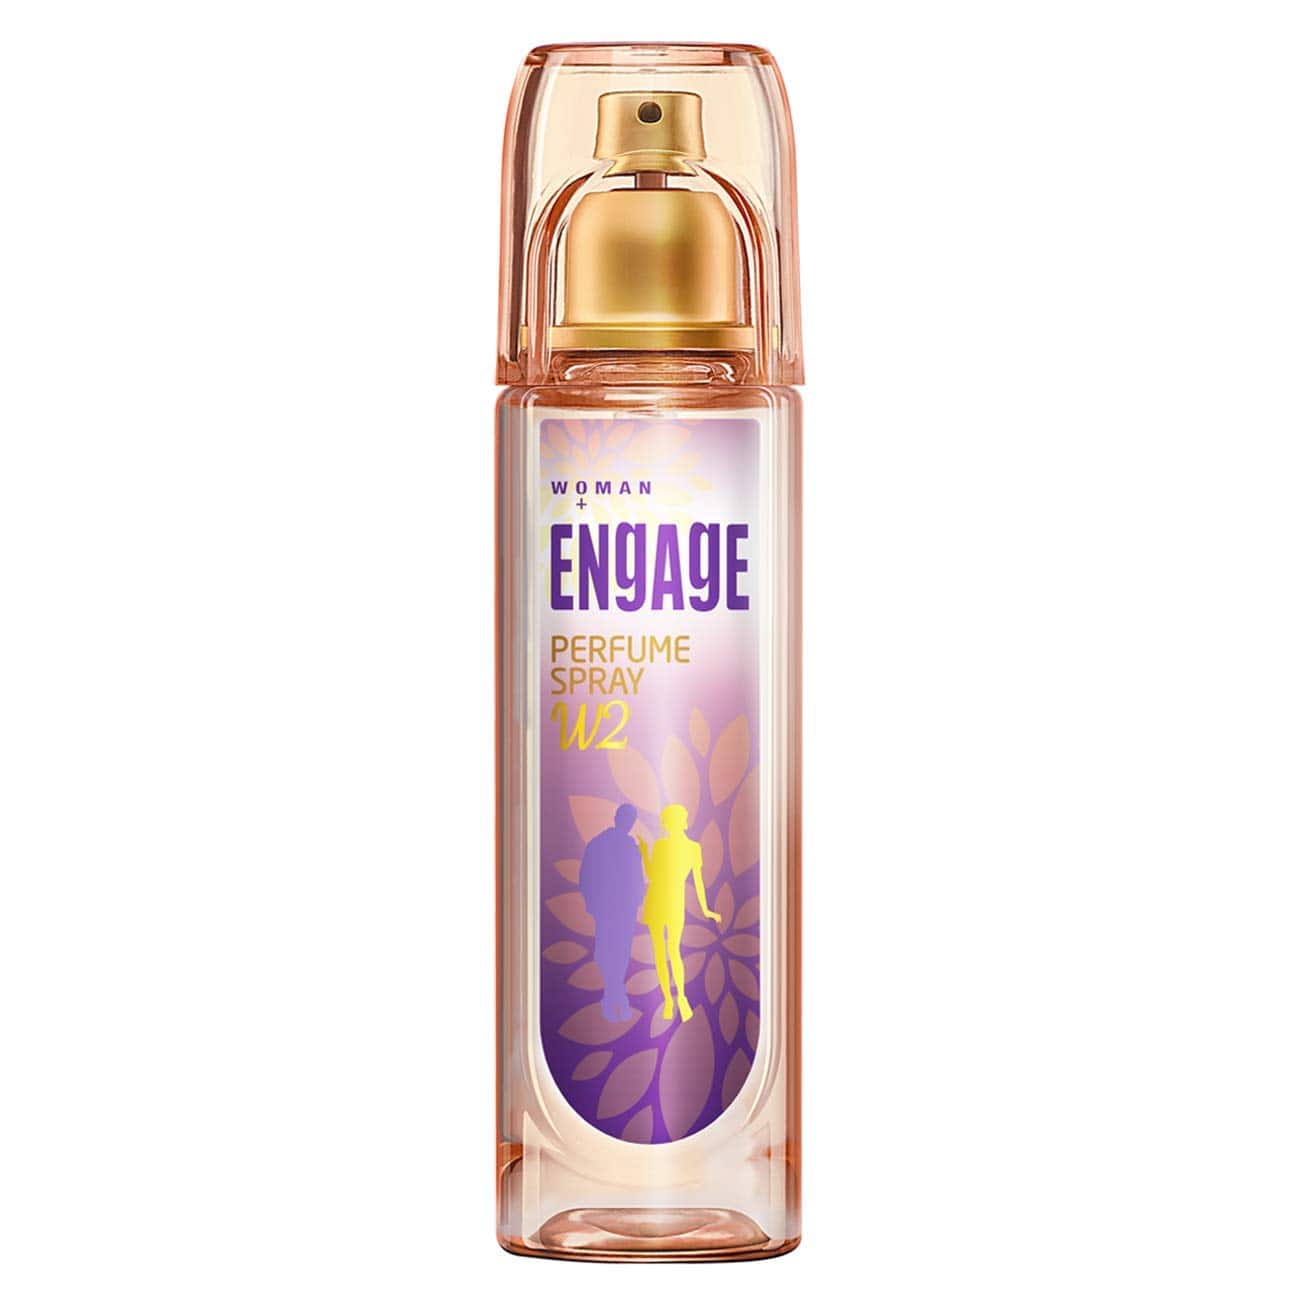 Engage W2 Perfume for Women, Floral and Fruity Fragrance Scent